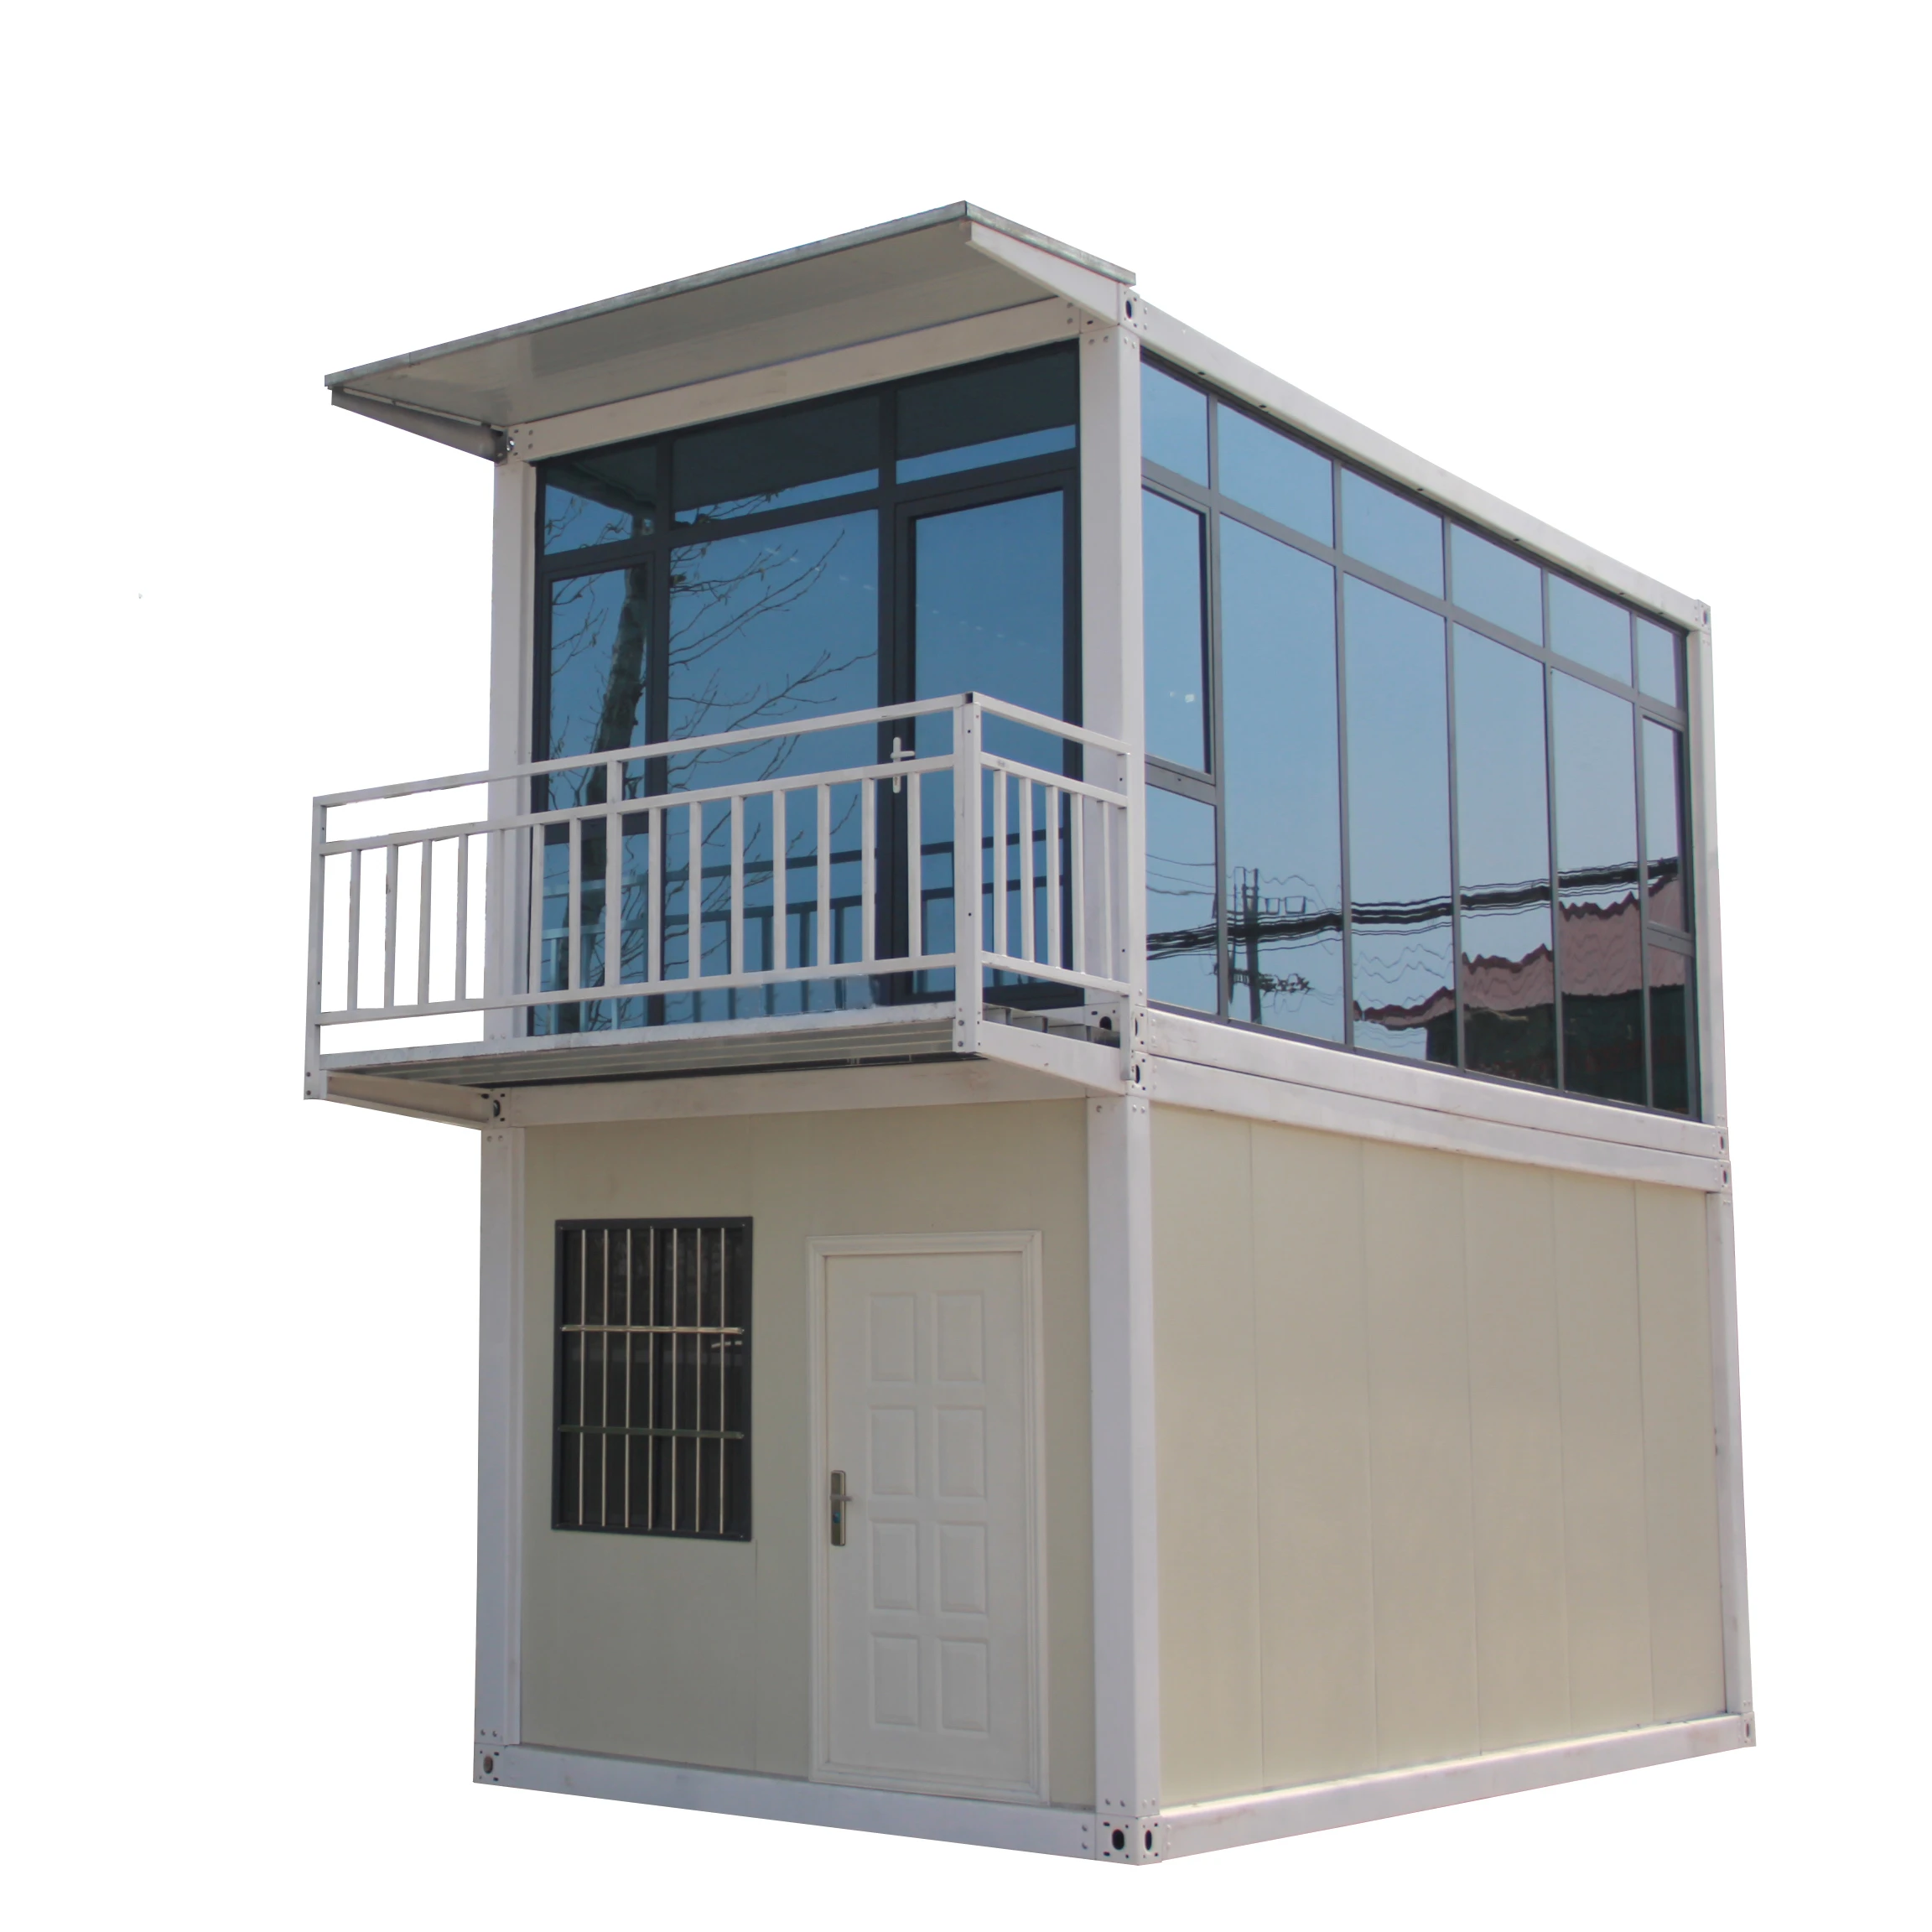 
two story glass Container Modular Prefabricated House 1 bedroom container house  (62246561173)